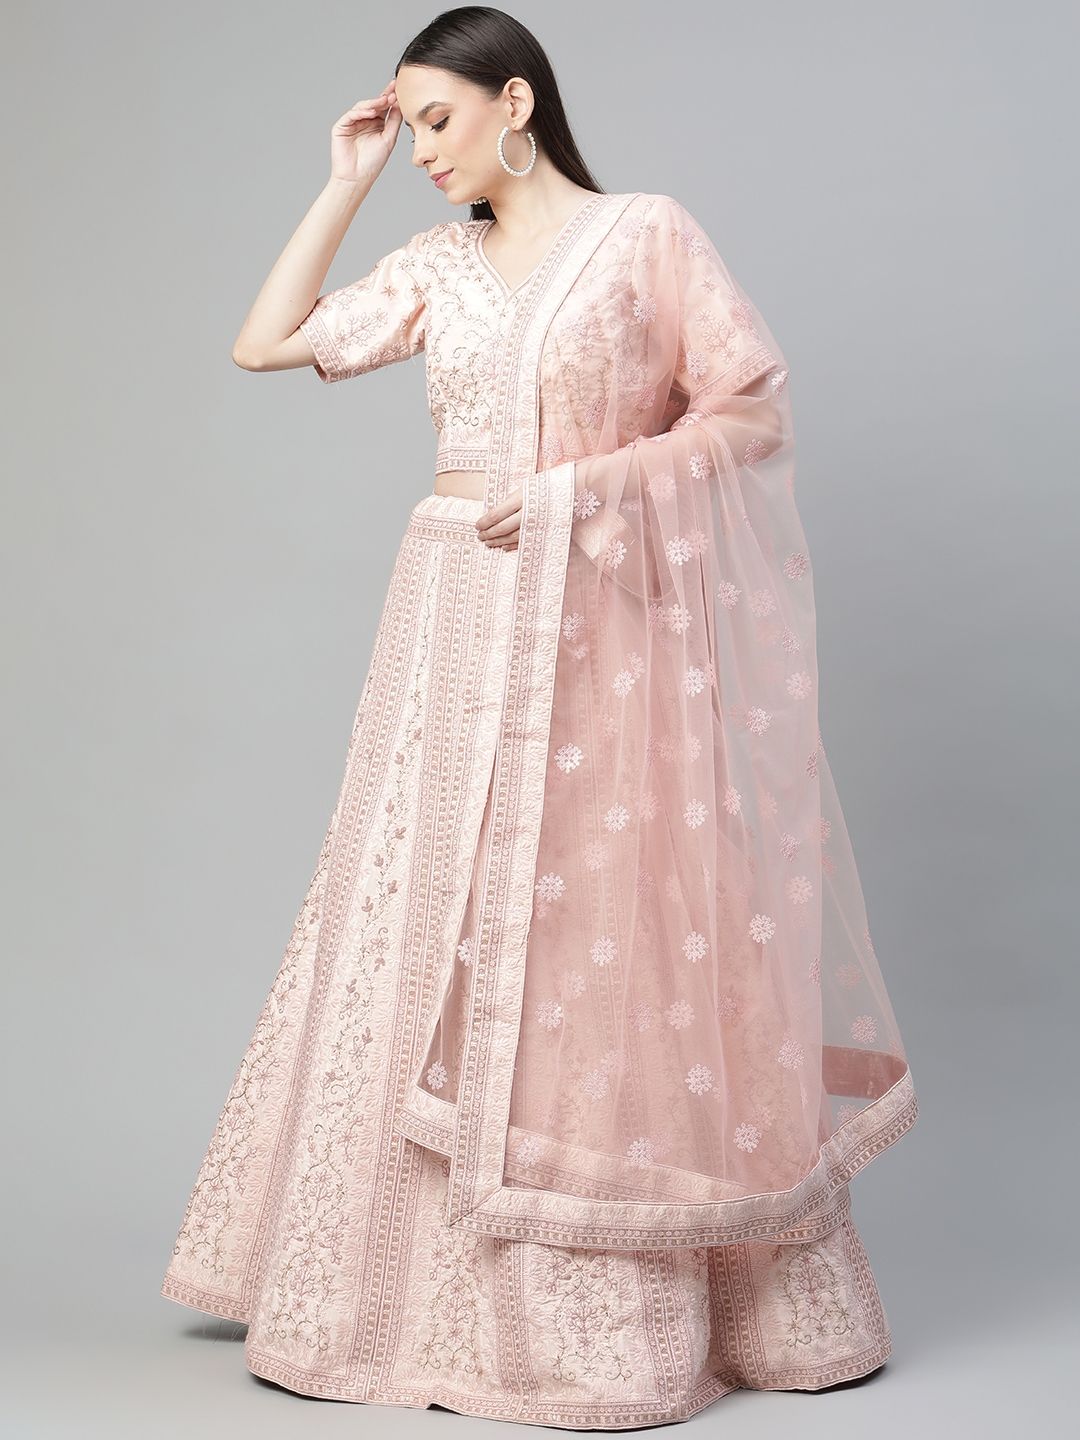 Readiprint Fashions Peach-Coloured Embroidered Unstitched Lehenga & Blouse With Dupatta Price in India